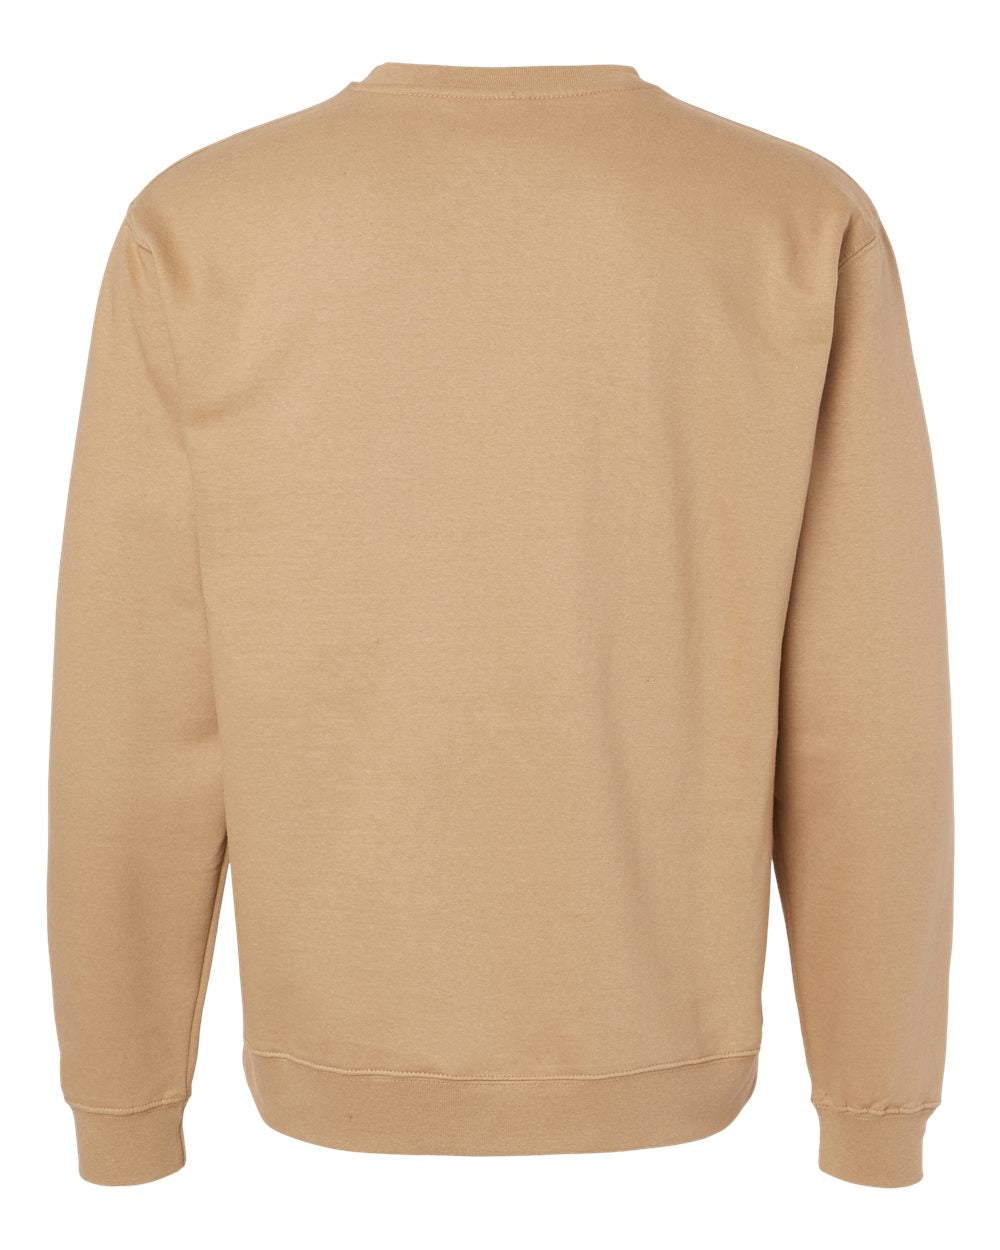 Independent Trading Co. Midweight Sweatshirt SS3000 #color_Sandstone